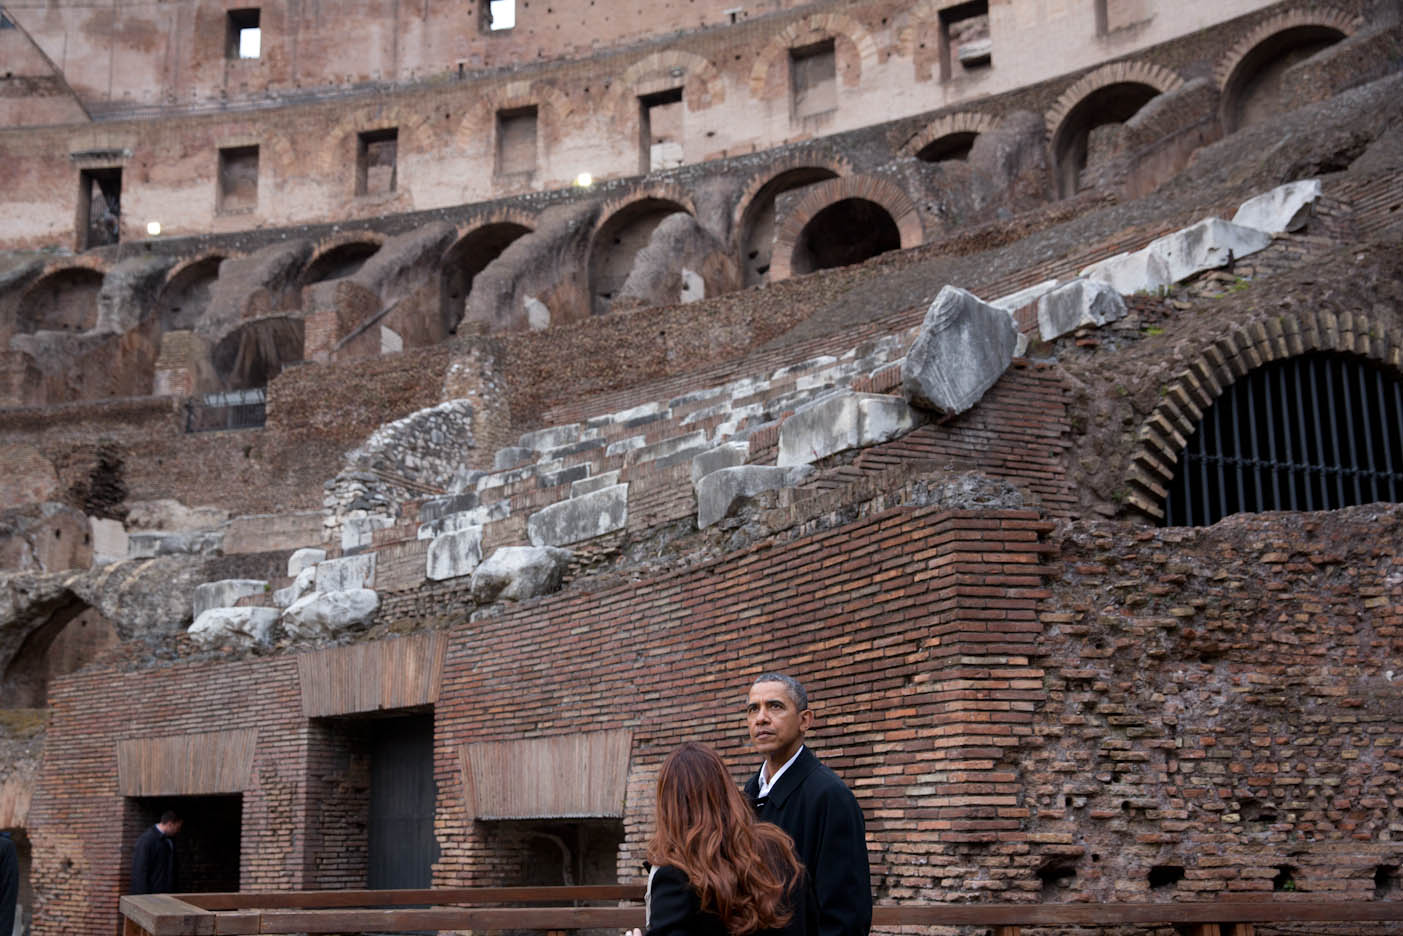 President Barack Obama with Barbara Nazzaro, Technical Dir. and Architect of the Colosseum, tour the Colosseum in Rome, Italy, March 27, 2014.